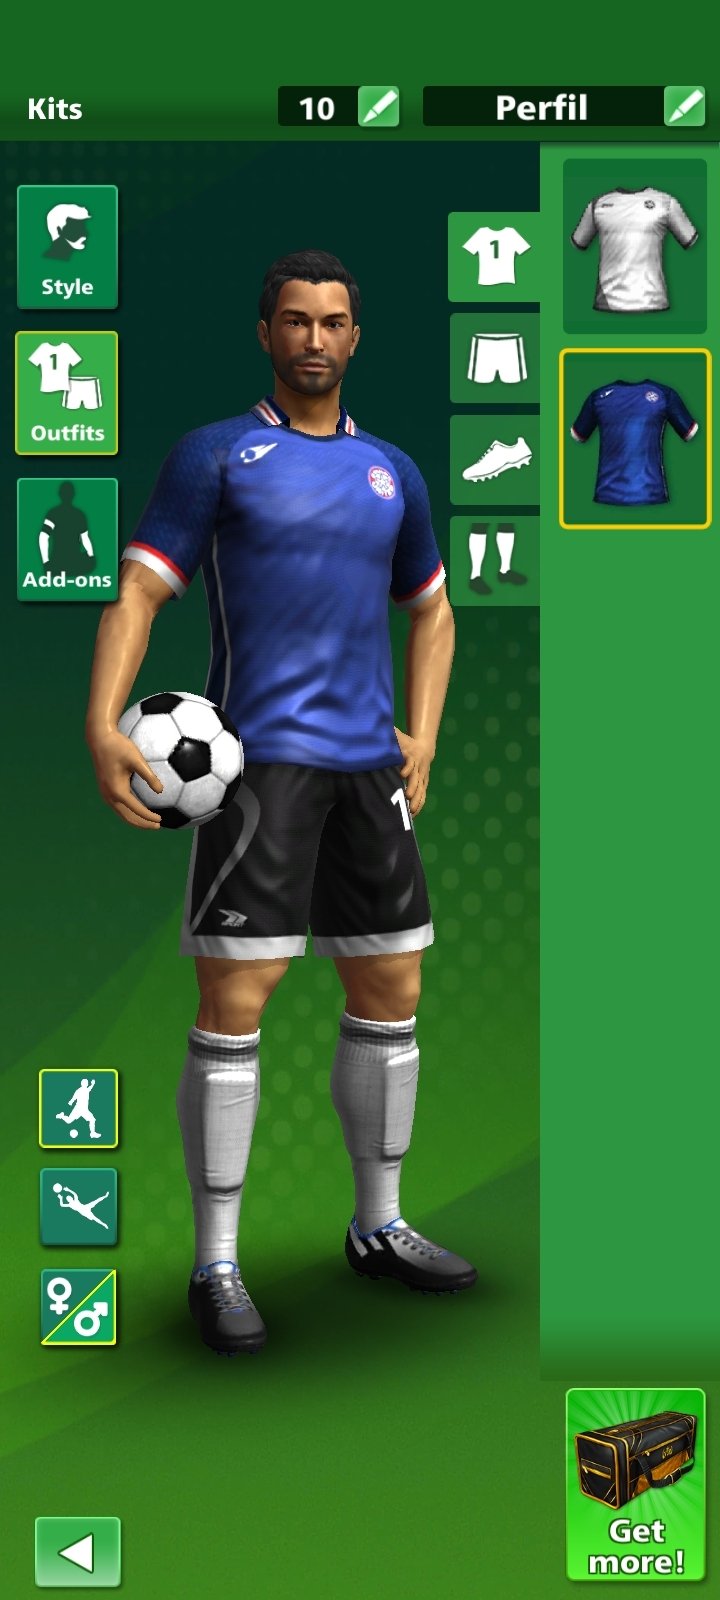 download the last version for ipod Football Strike - Perfect Kick